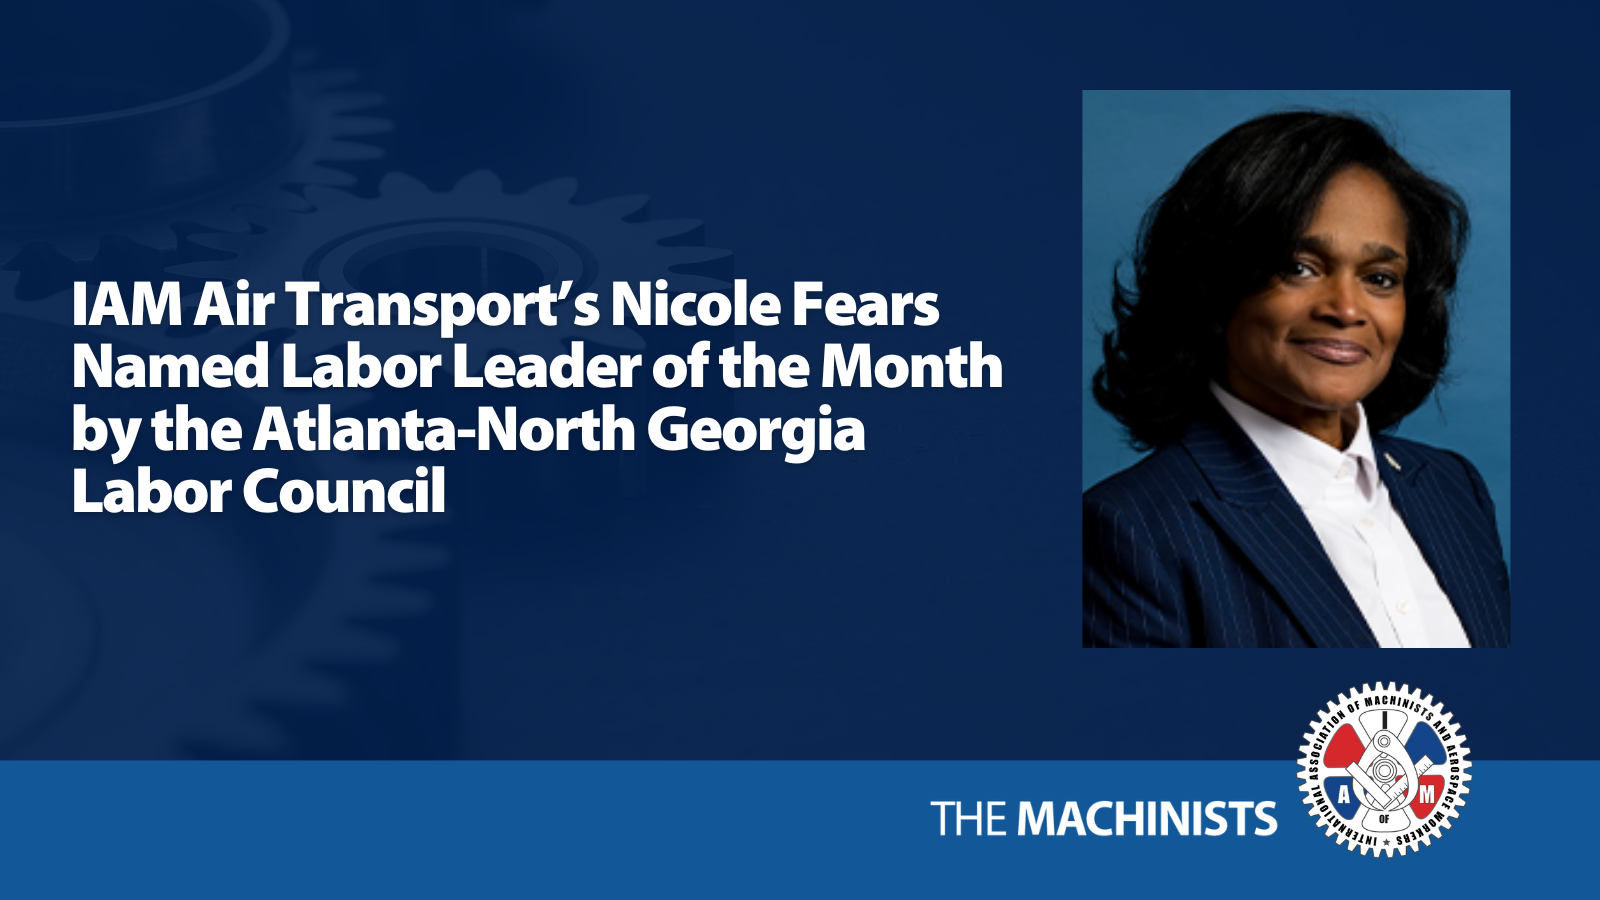 IAM Air Transport’s Nicole Fears Named Labor Leader of the Month by the Atlanta-North Georgia Labor Council